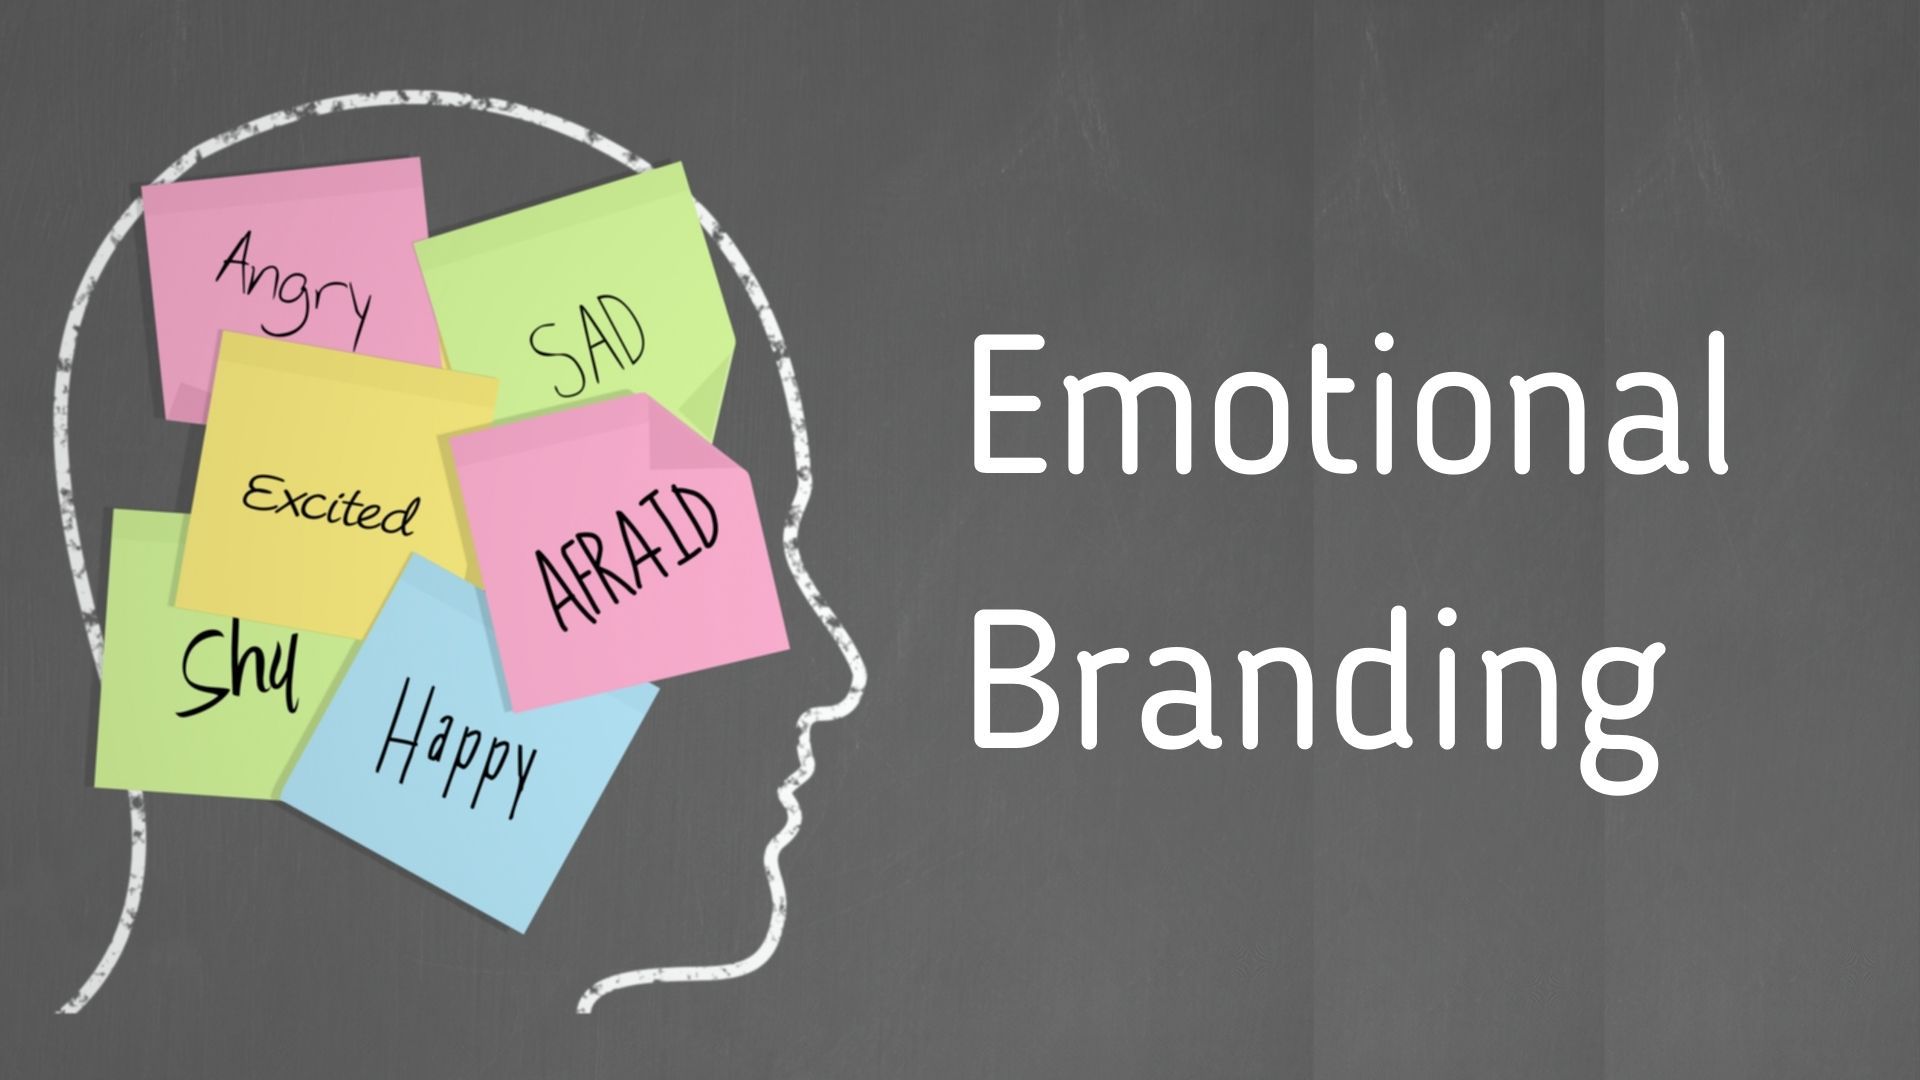 The role of emotional marketing in brand storytelling